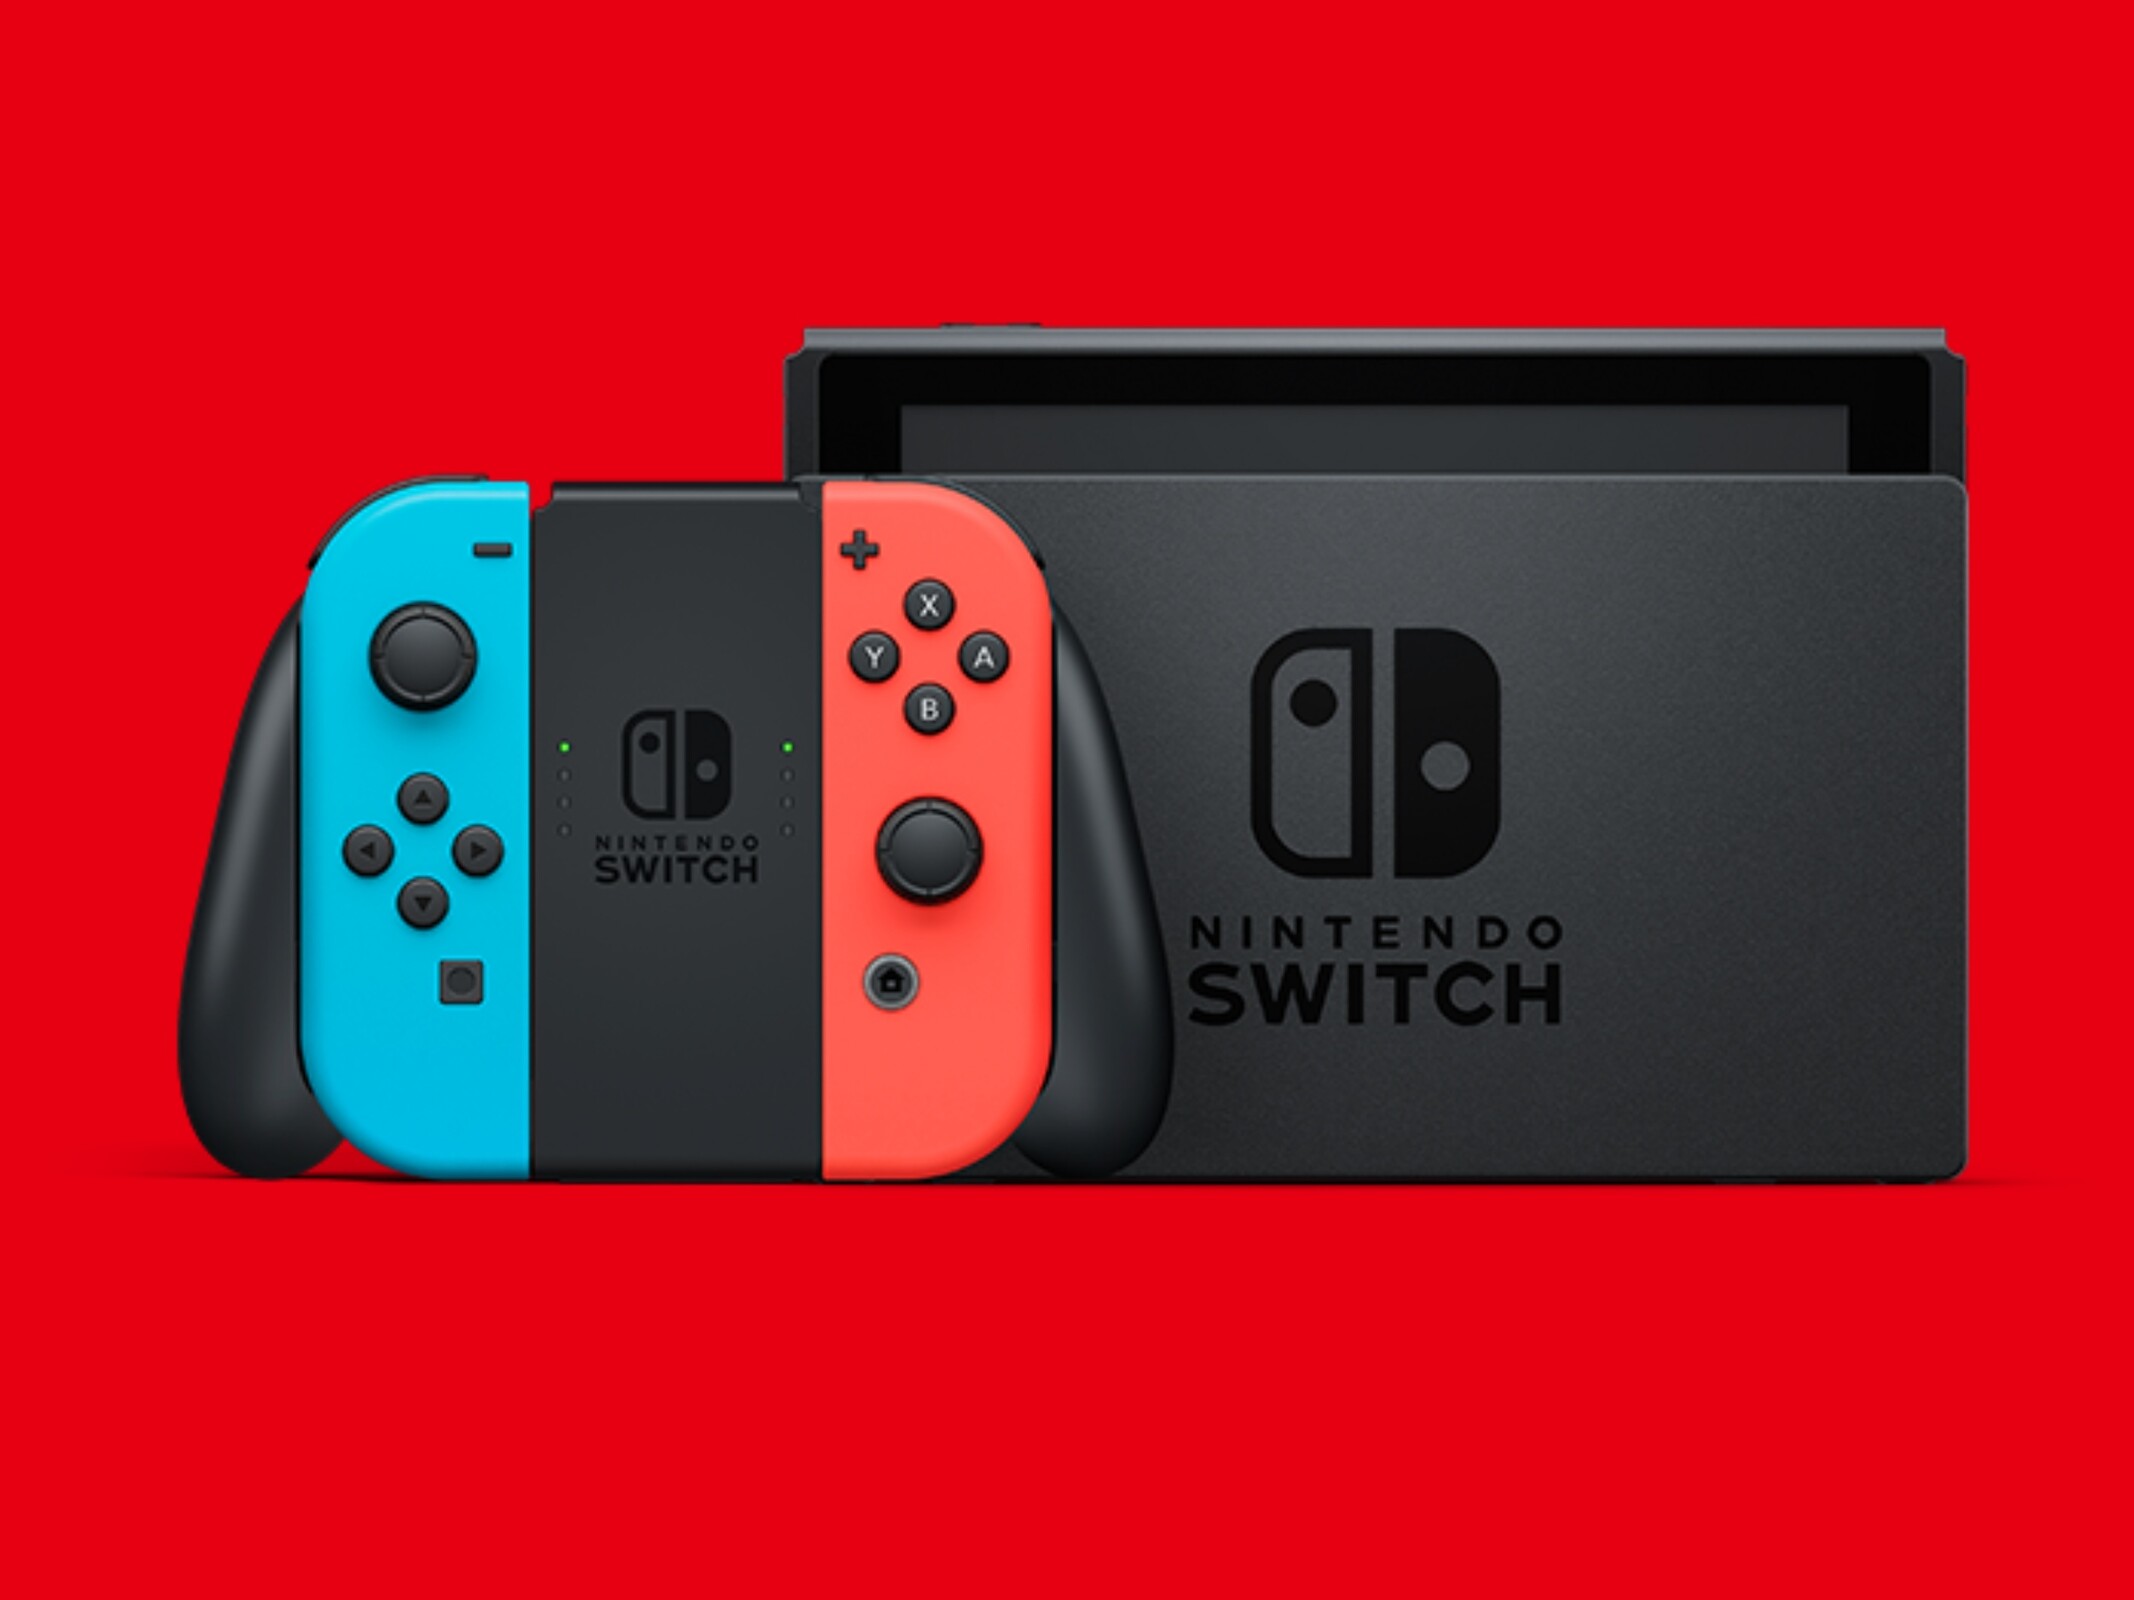 Nintendo Switch 2 engine to support 240 Hz according to new leak 